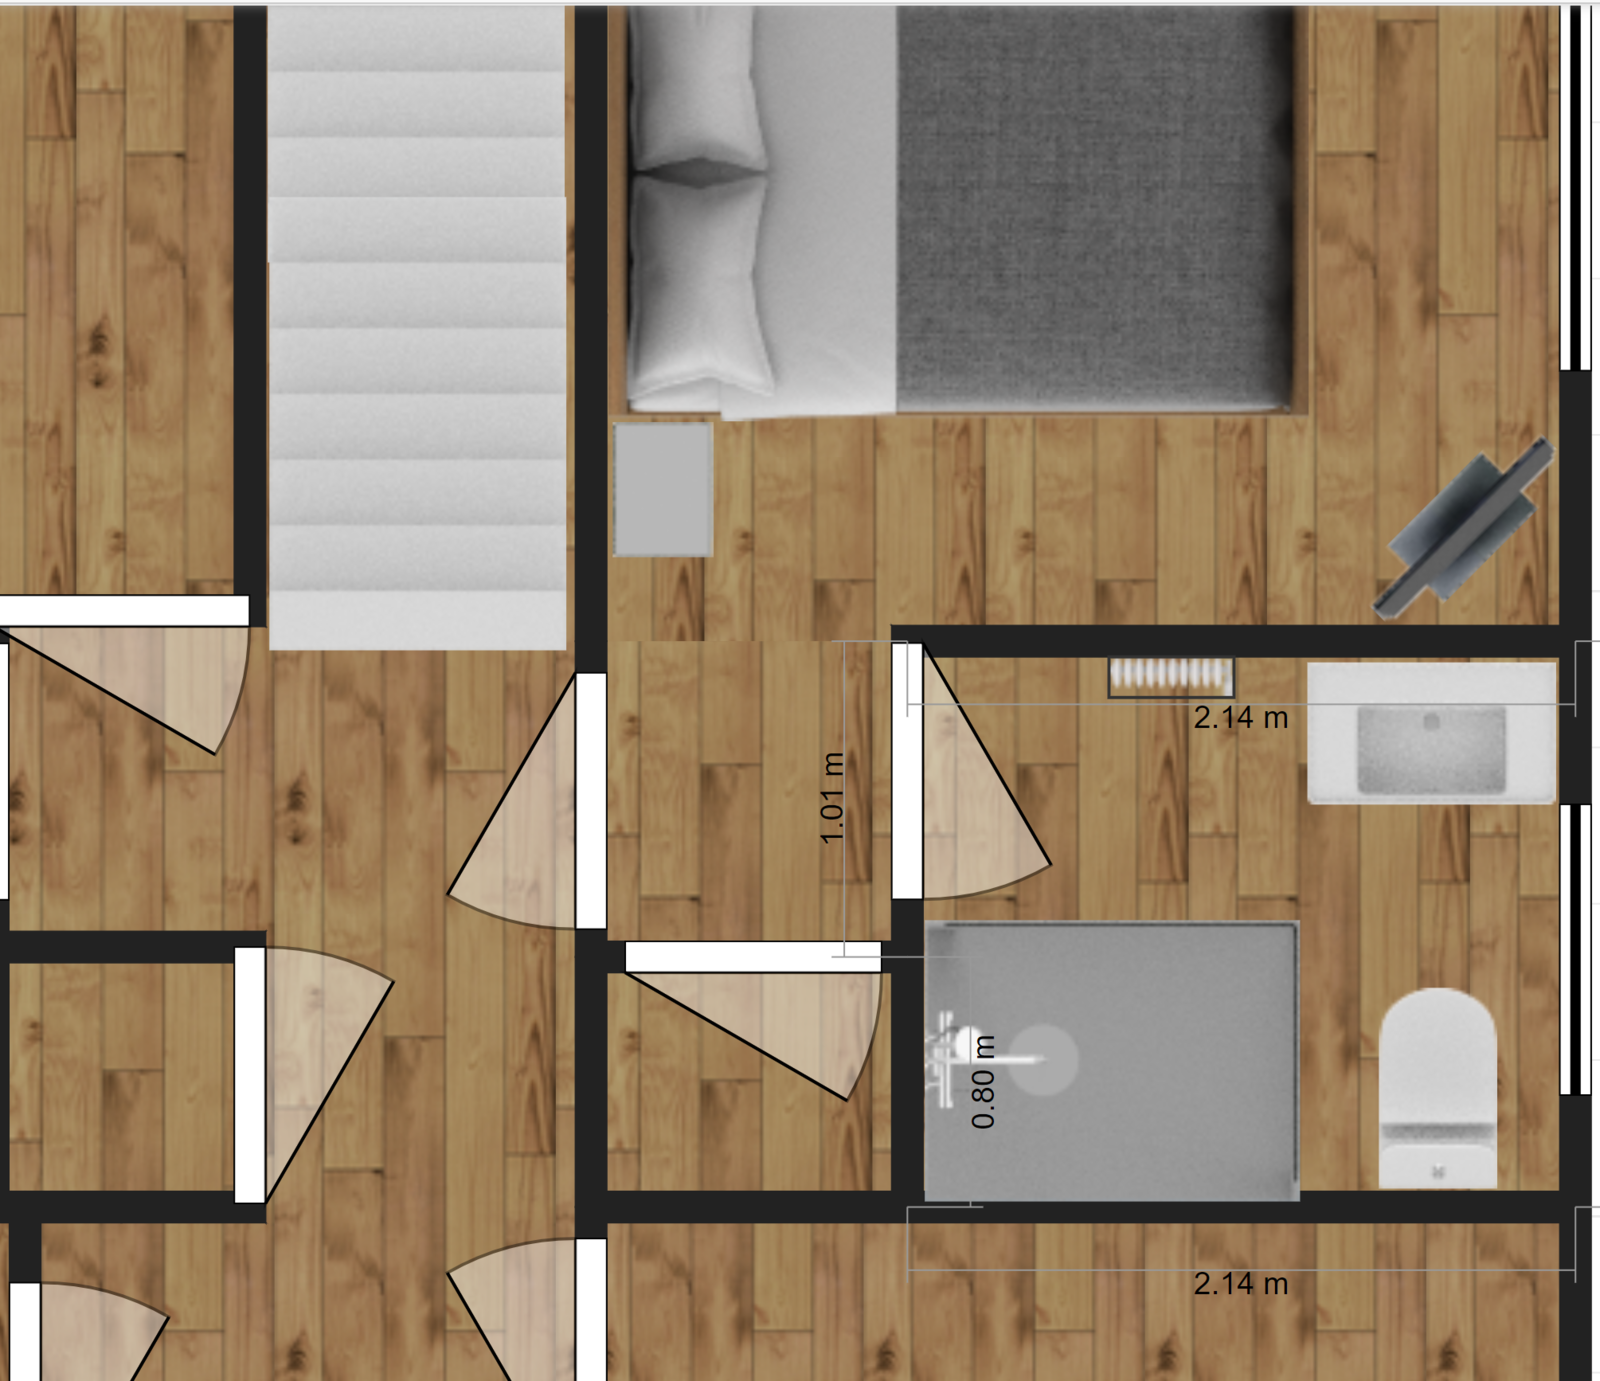 2019-10-14 23_14_20-3D room planning tool. Plan your room layout in 3D at roomstyler.png